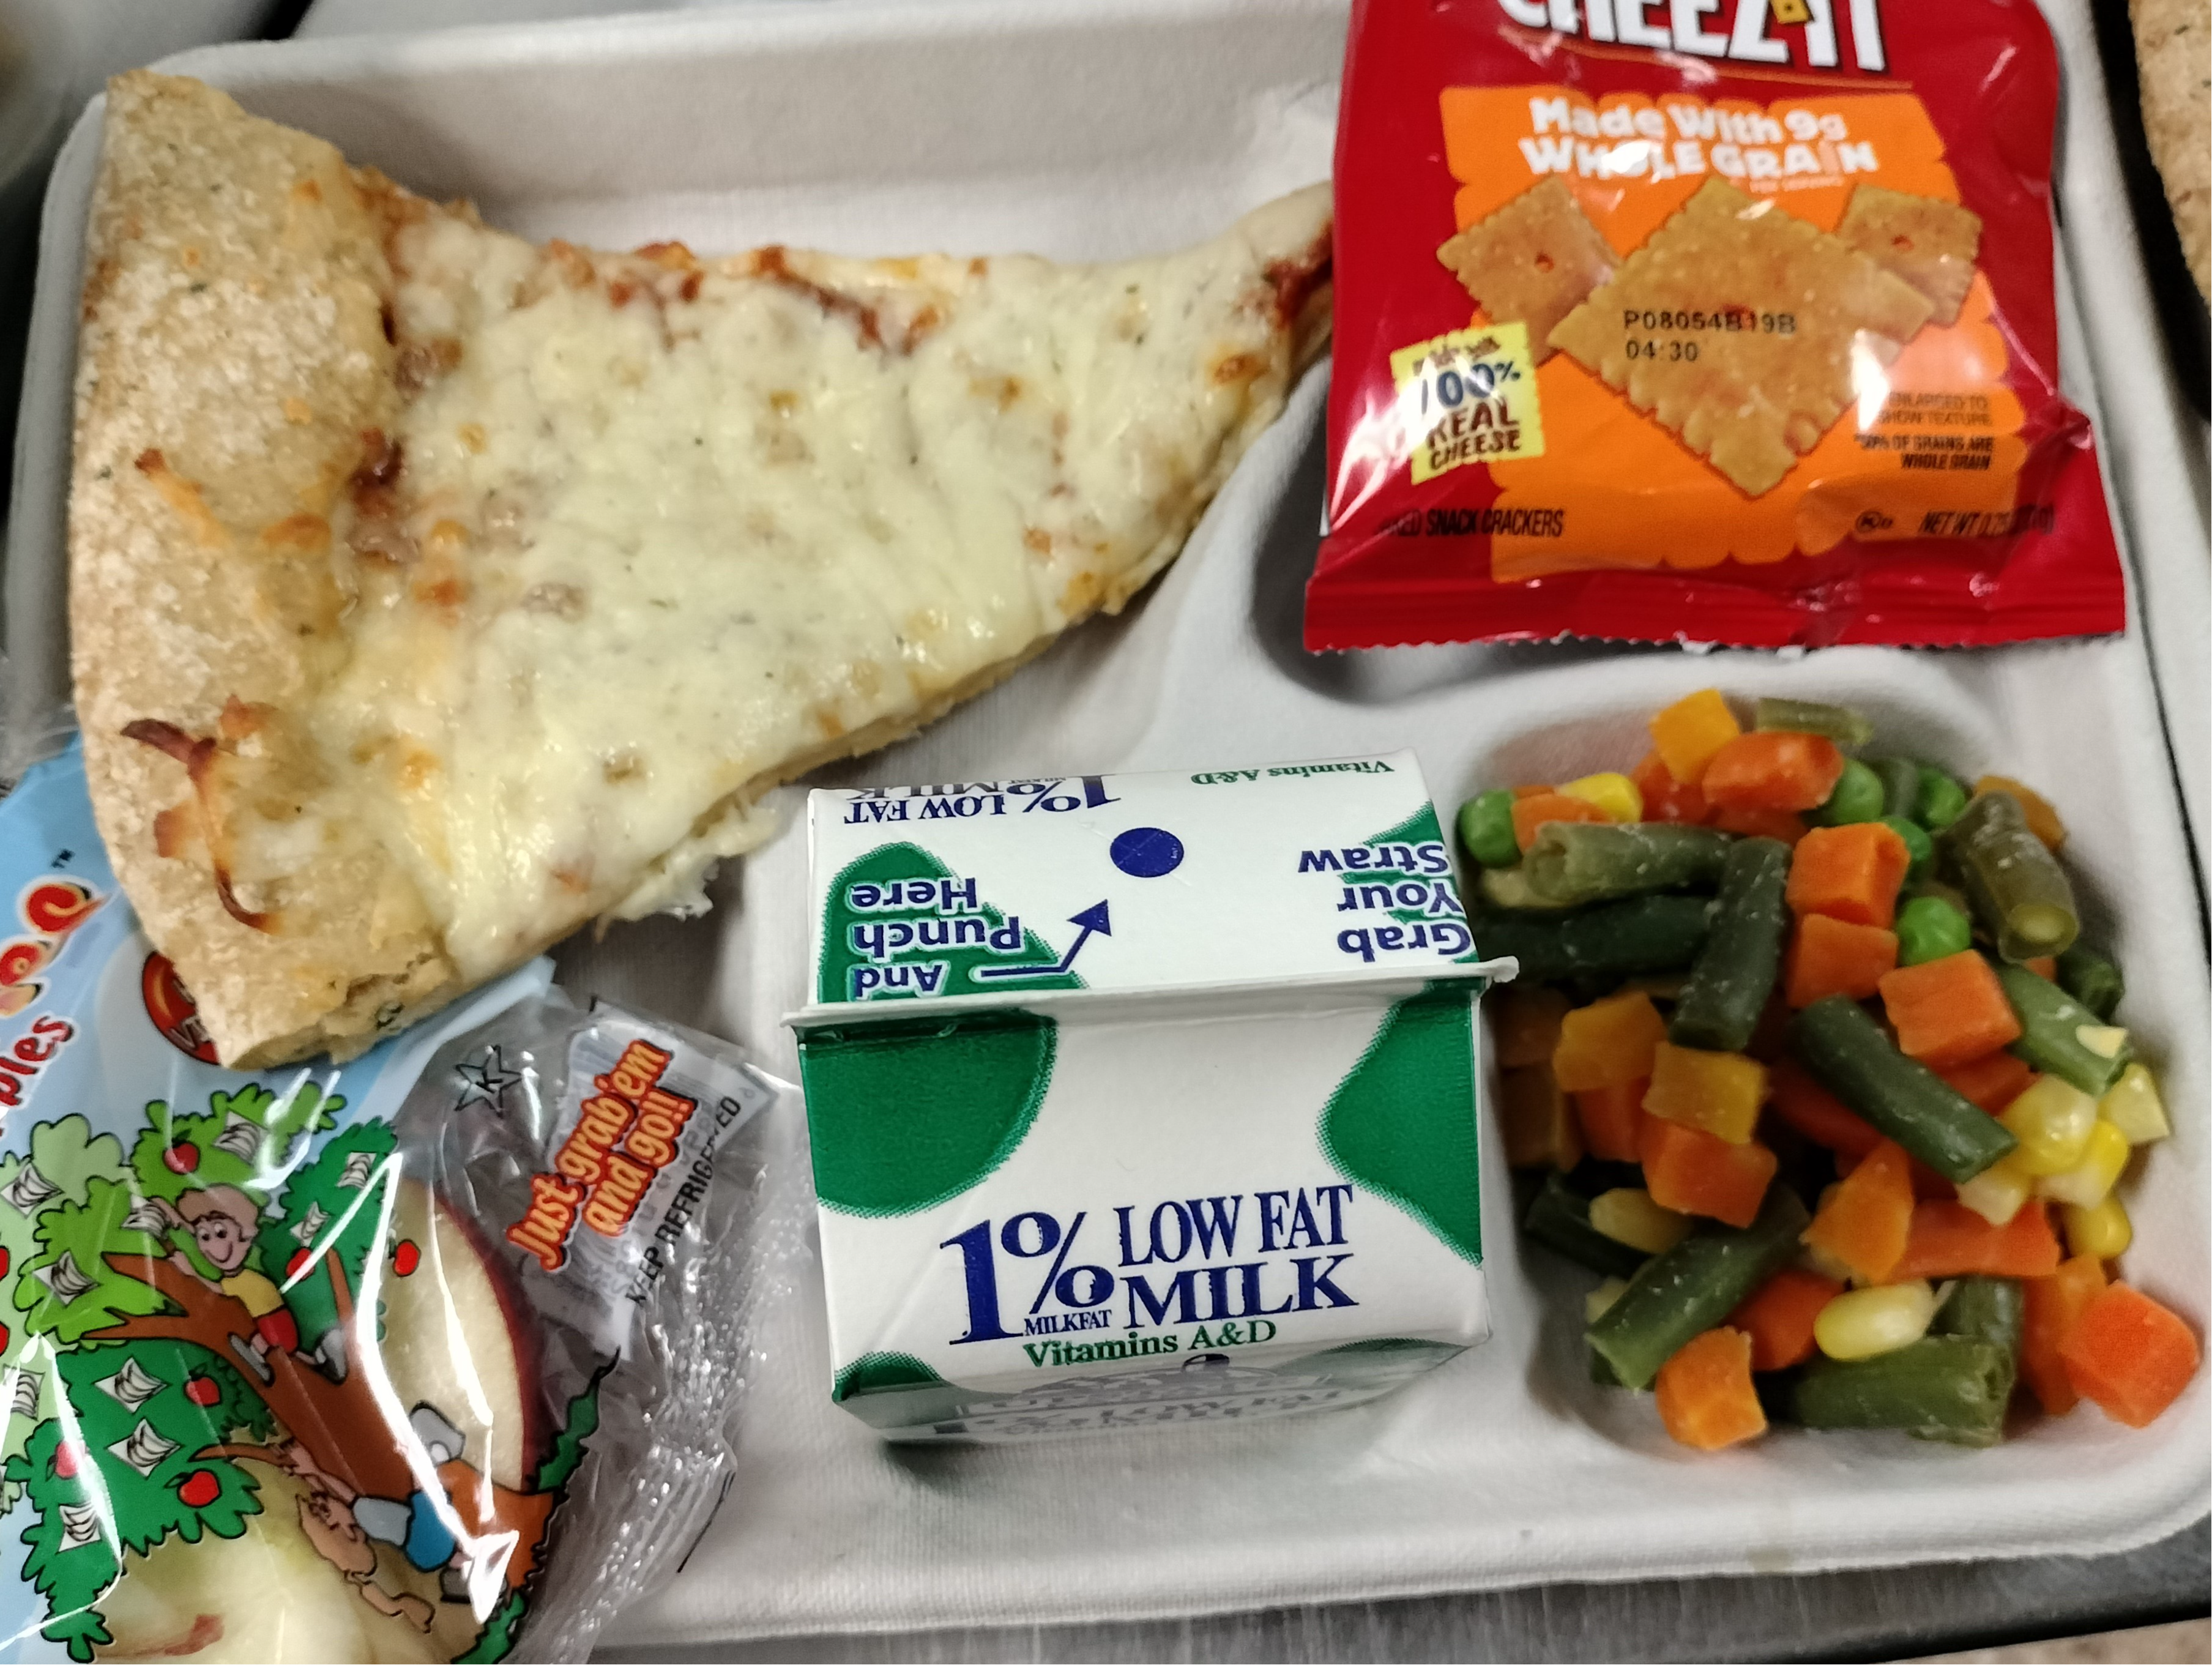 Lunch served 11/20/23.